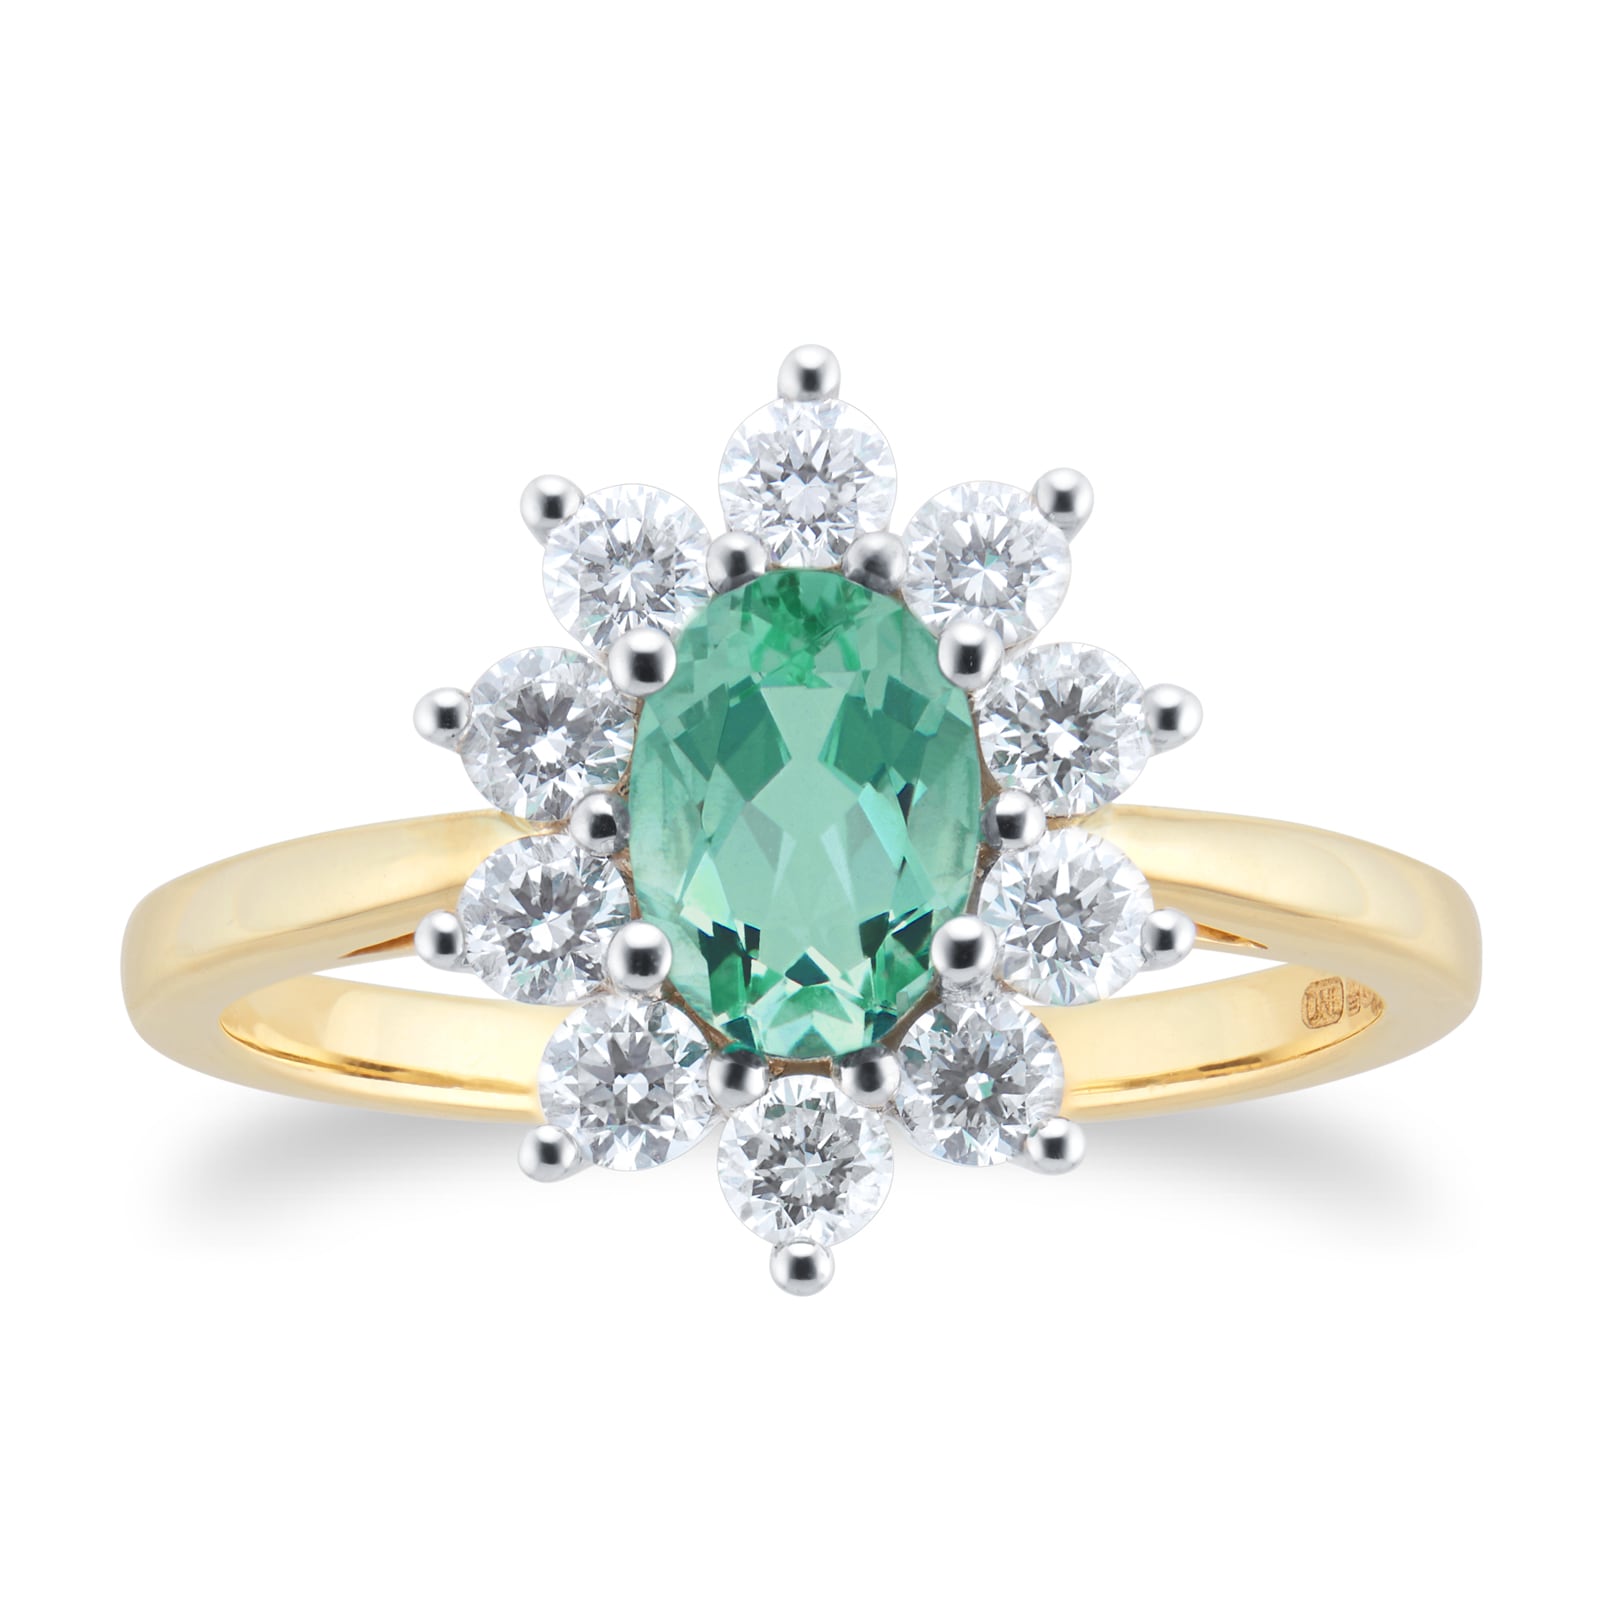 18ct Yellow and White Gold Emerald And Diamond Cluster Ring - Ring Size I.5